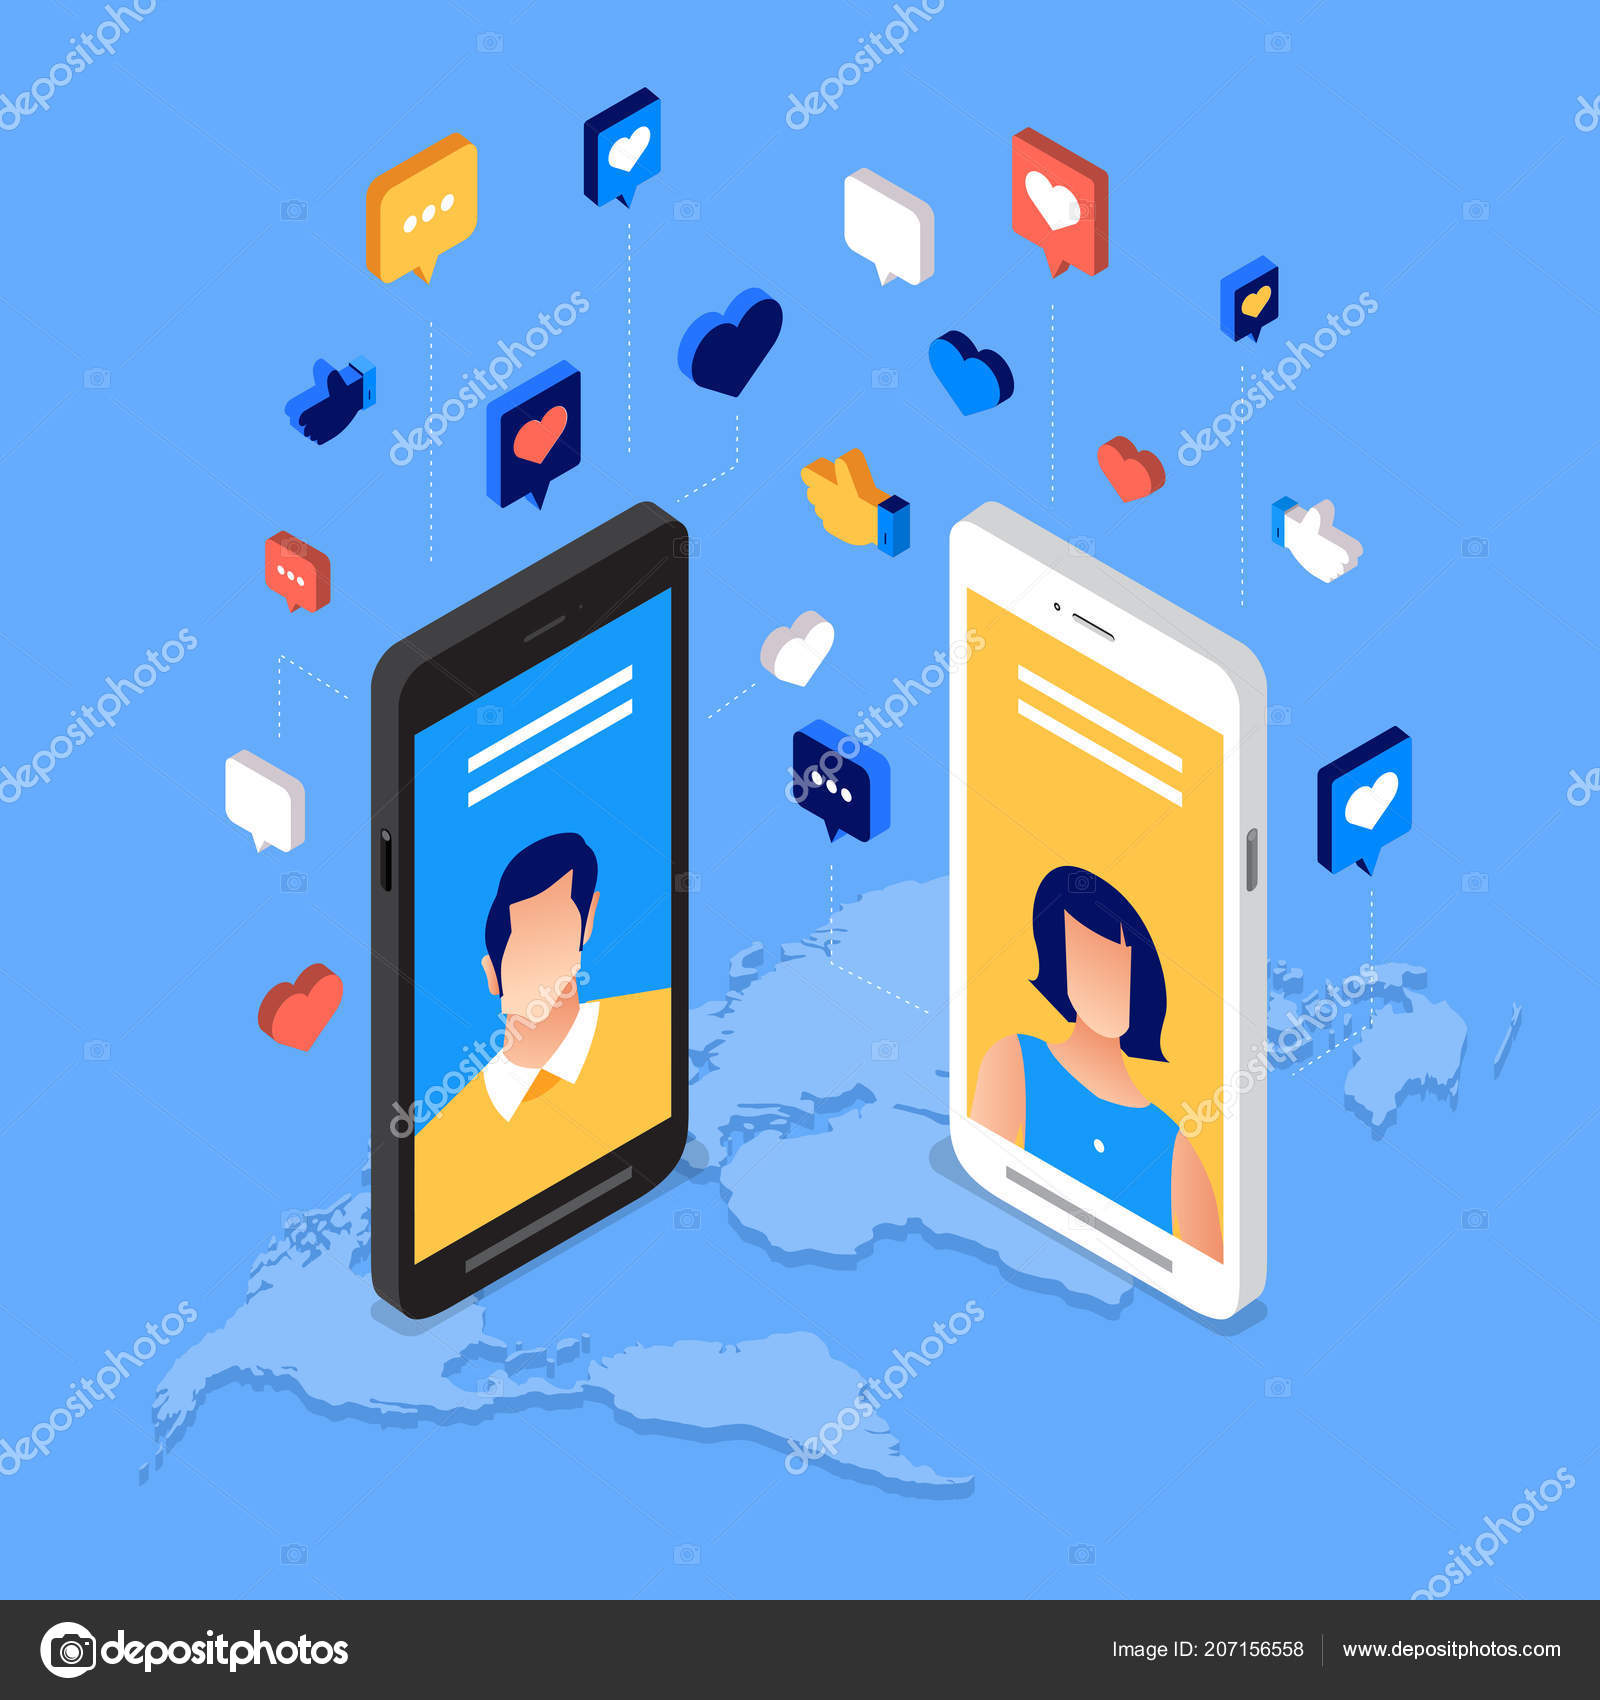 Social Media Day Vector Illustration Connecting People Together Cutting Edge Stock Vector C Emojoez 207156558